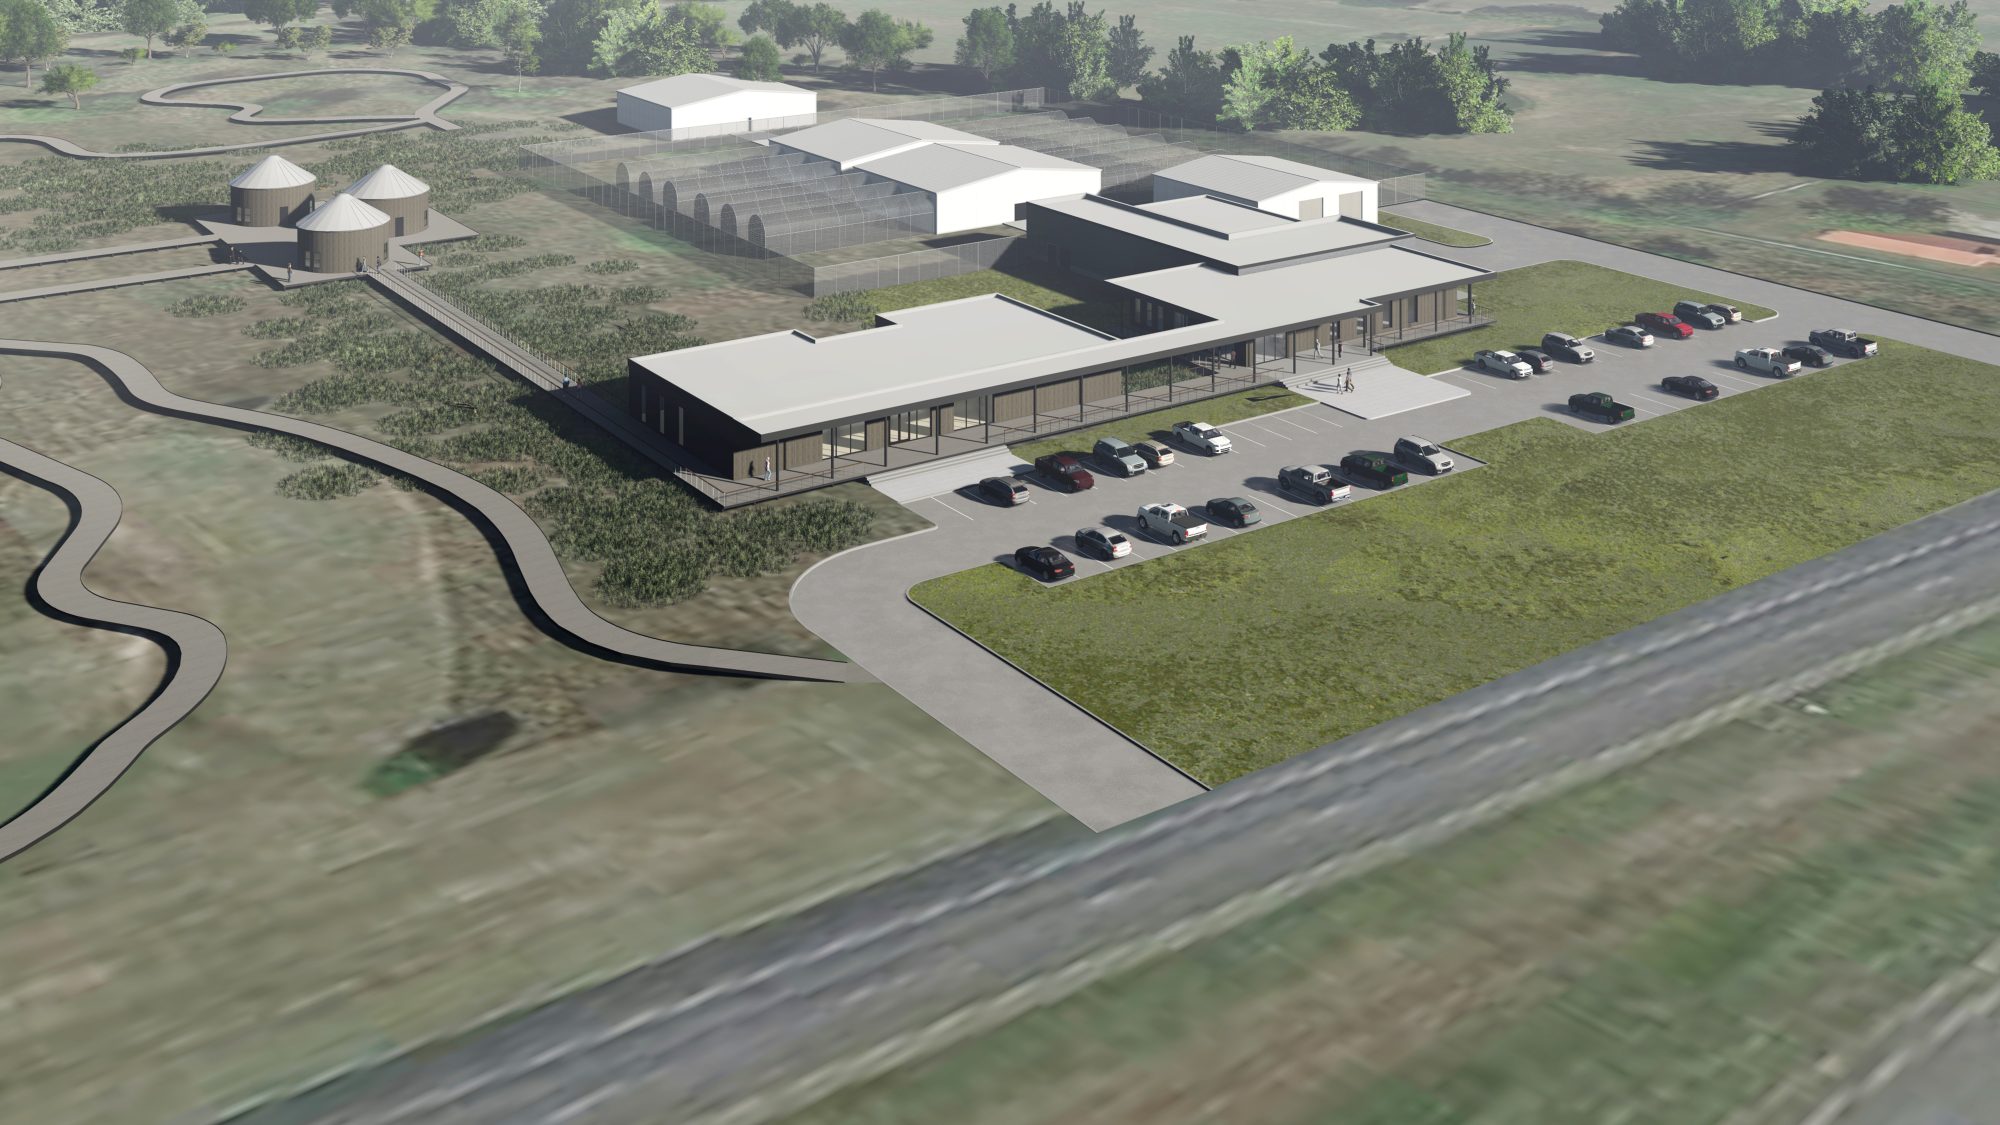 An arial rendering of the proposed gamebird research center